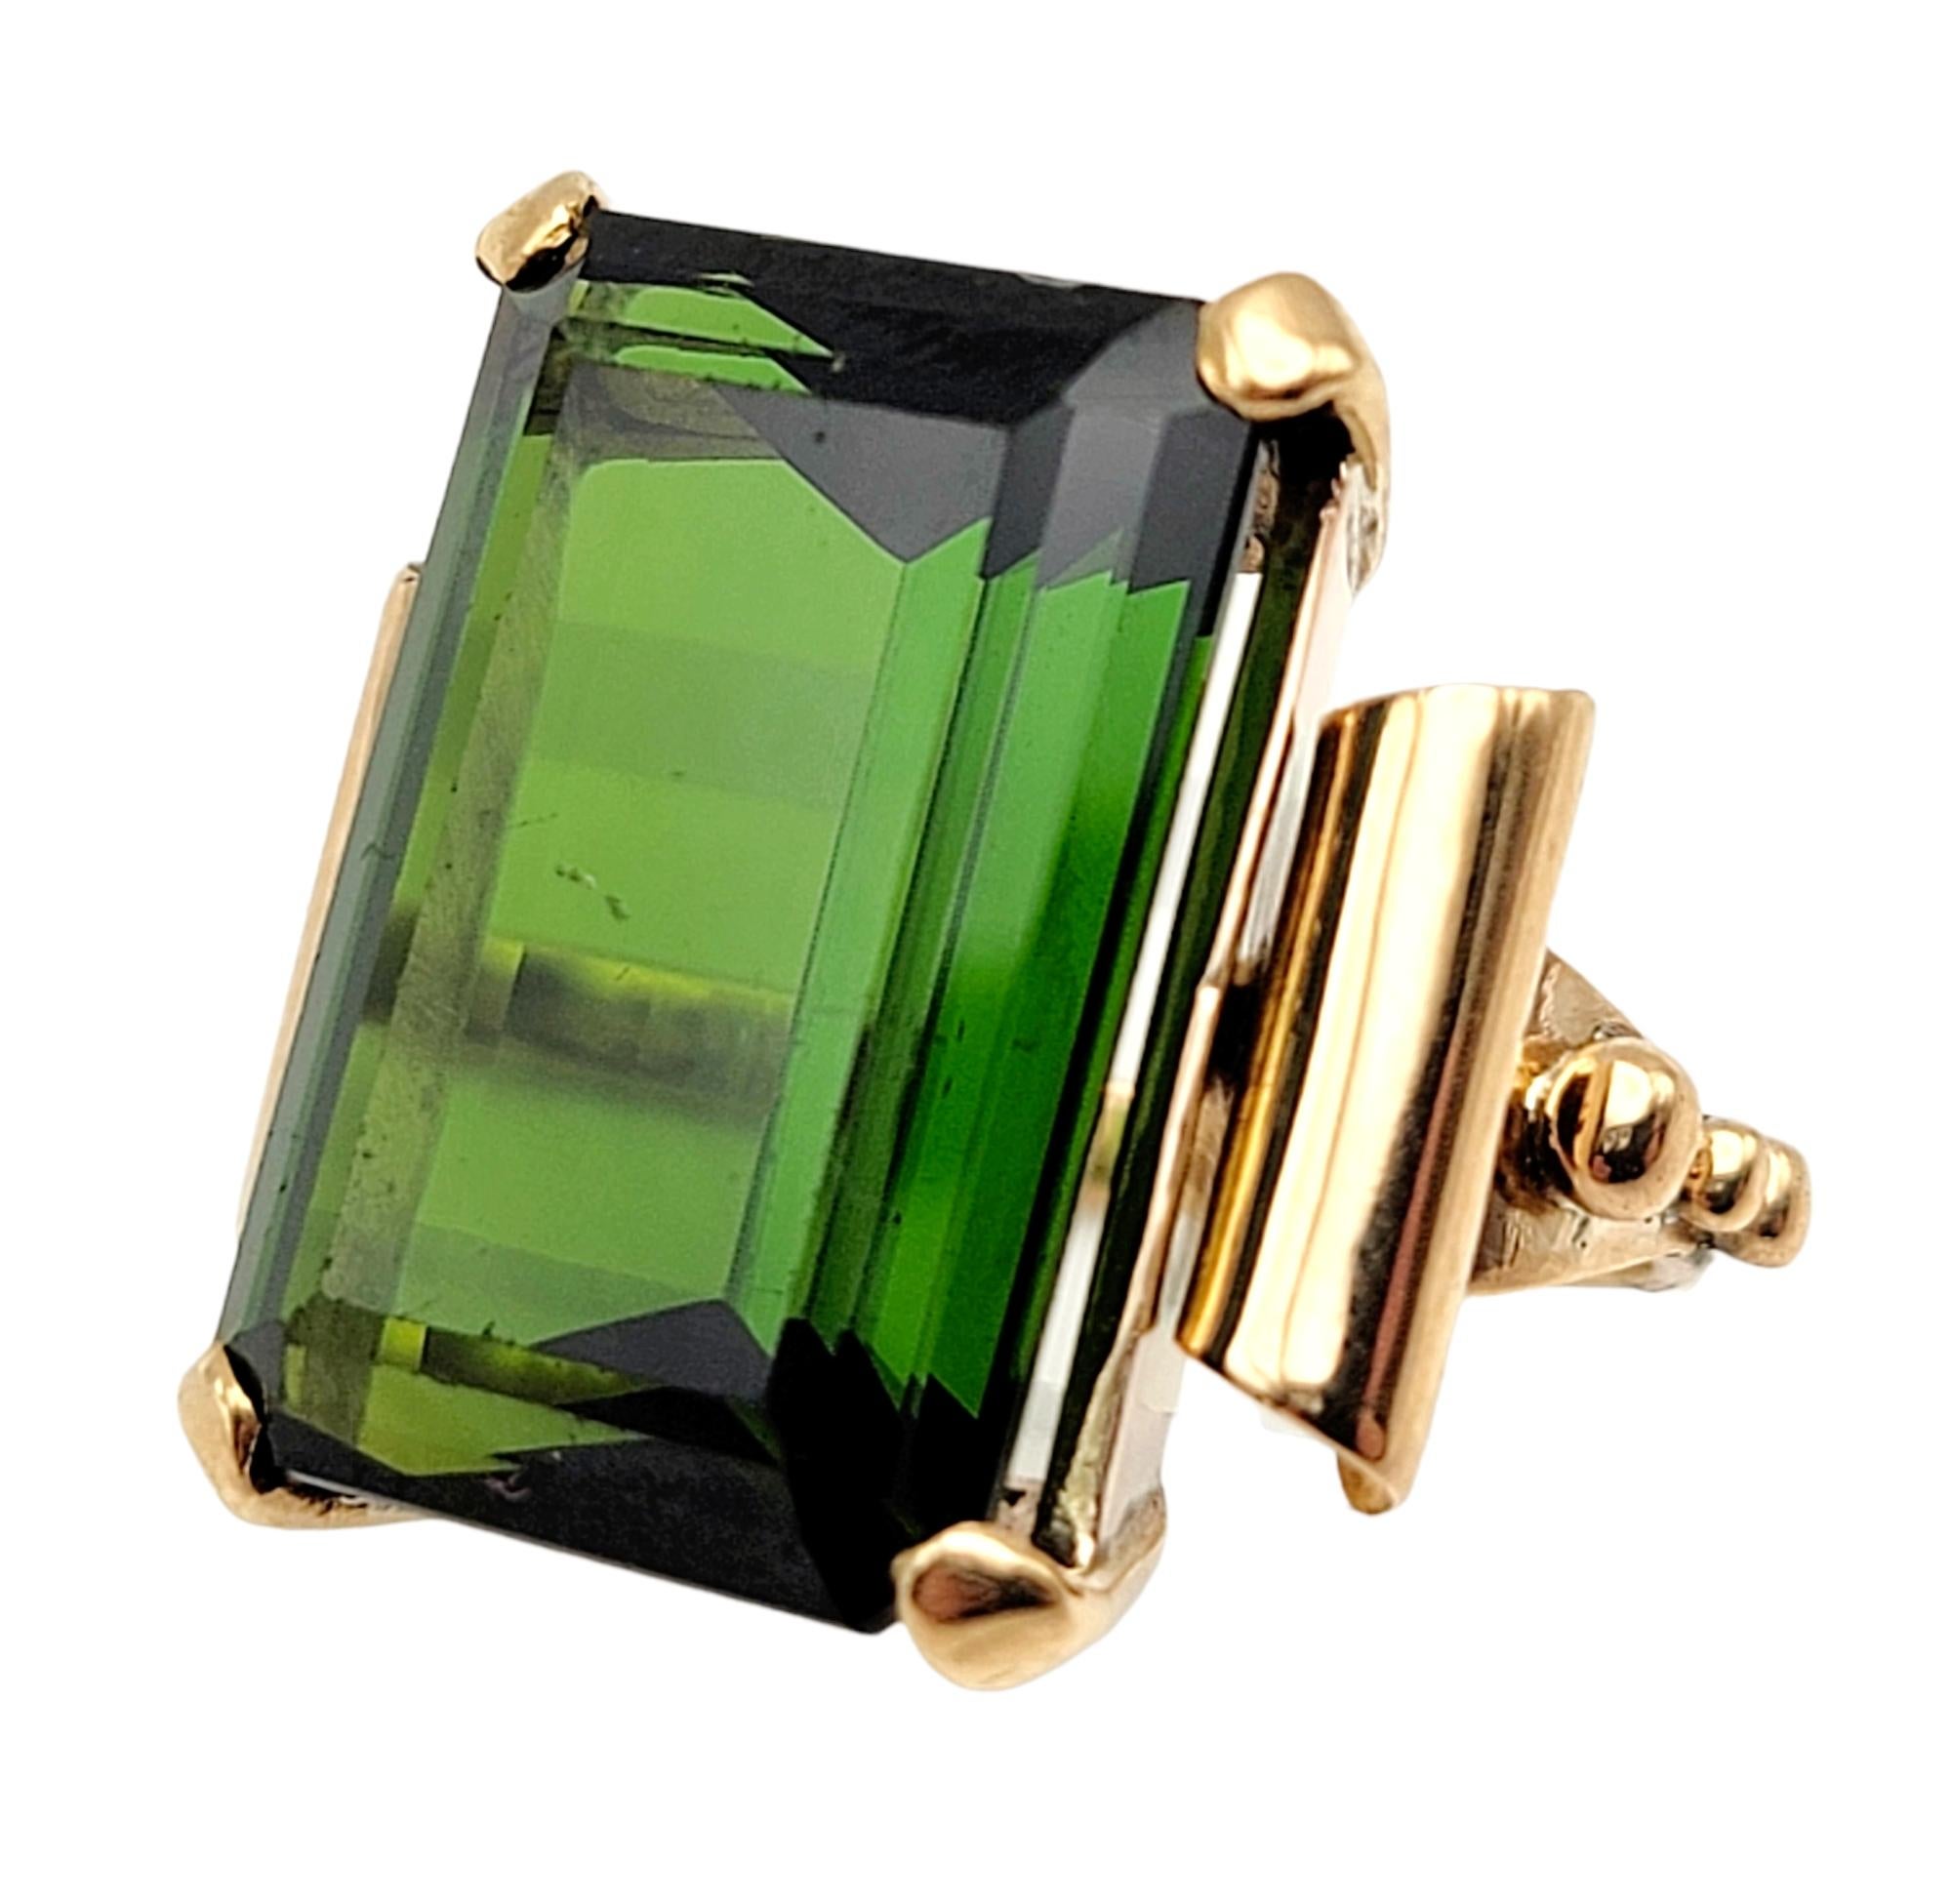 Vintage 15.58 Carat Emerald Cut Green Tourmaline Cocktail Ring in Yellow Gold In Good Condition For Sale In Scottsdale, AZ